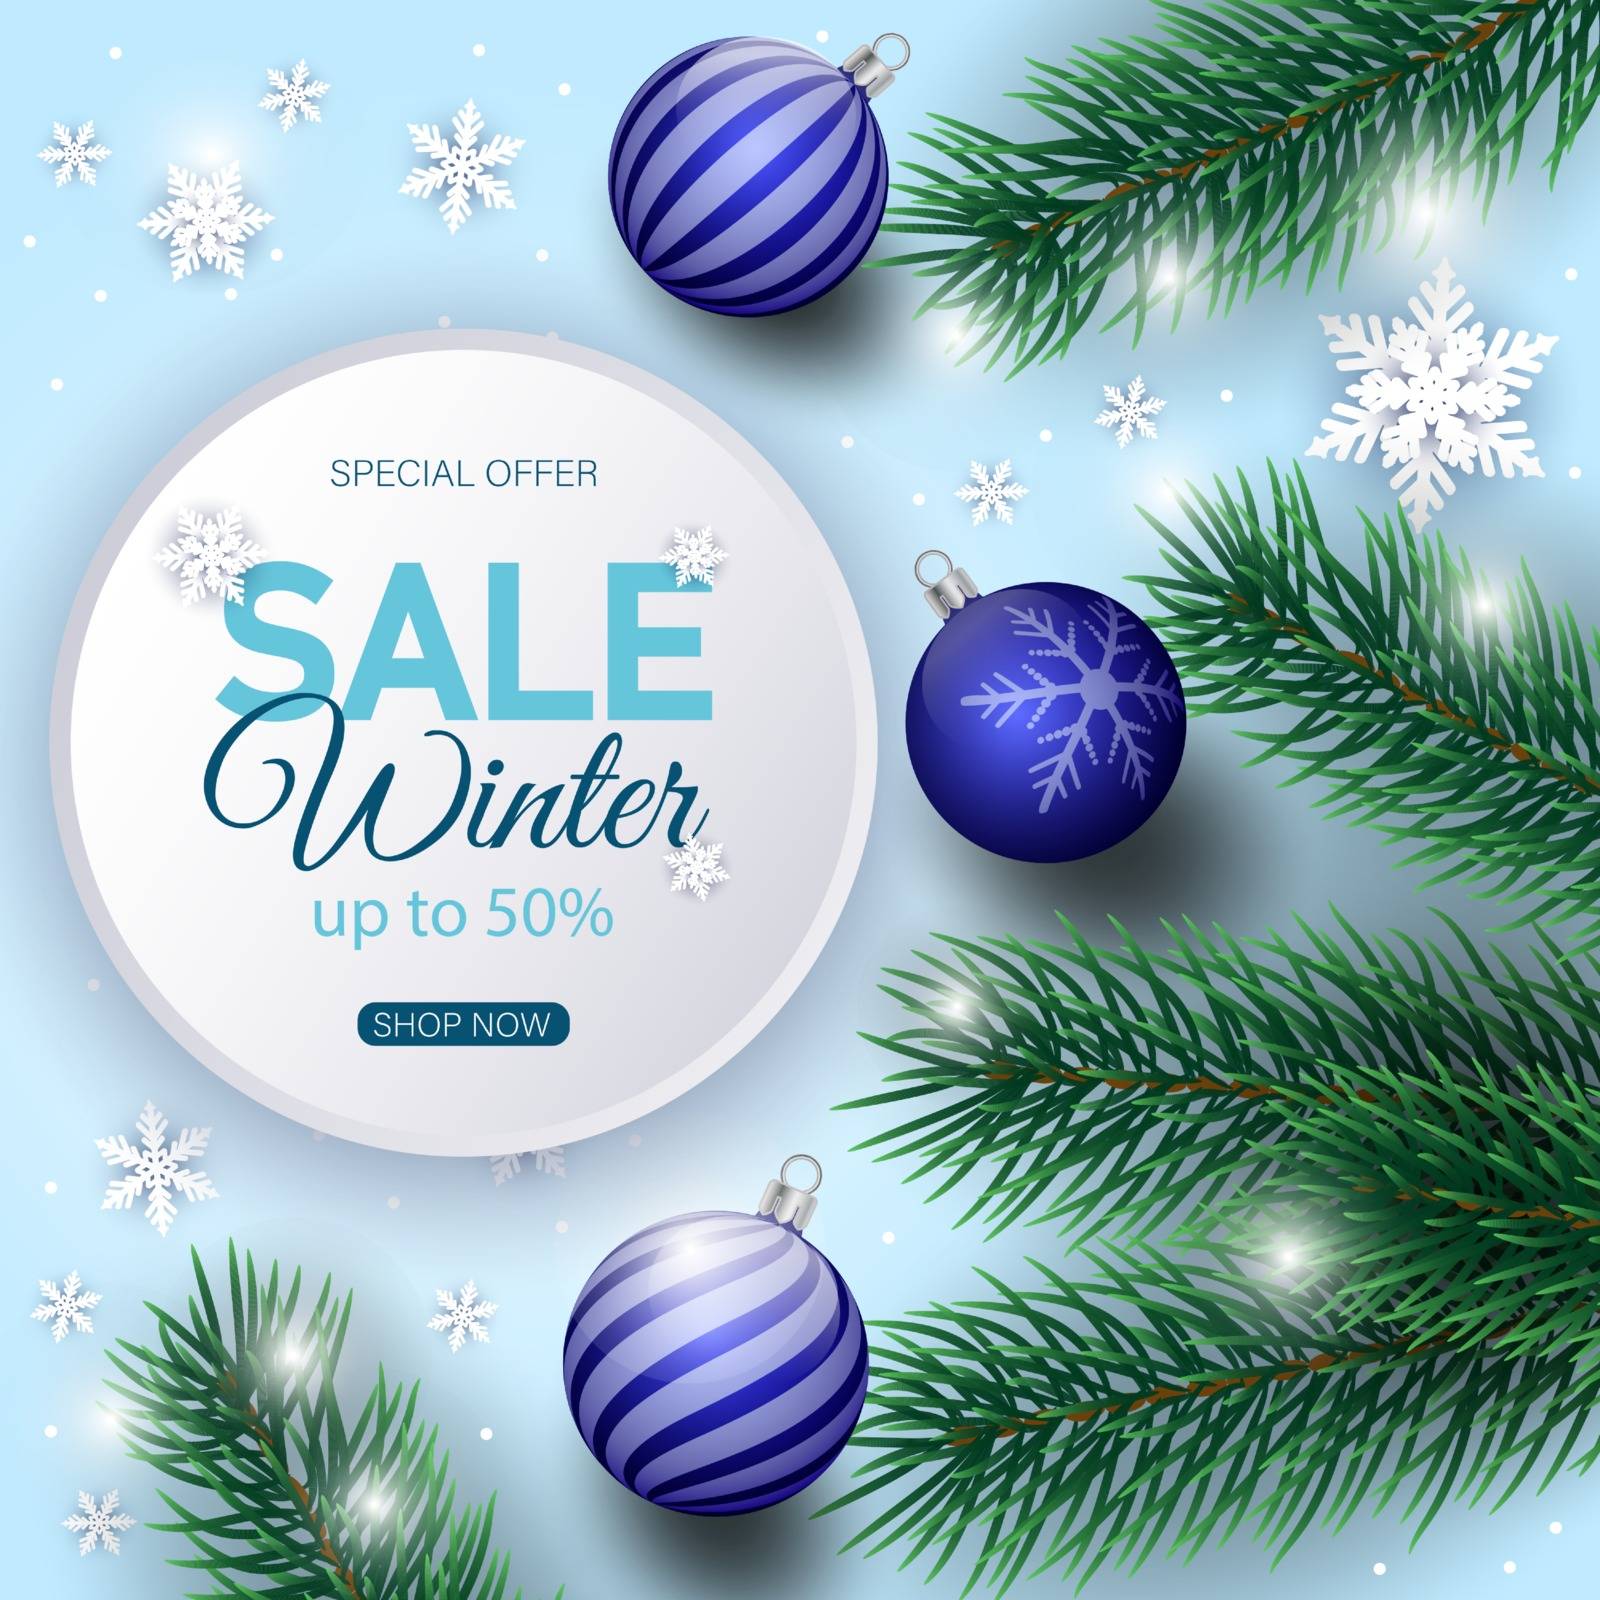 Winter sale banner decorated with Christmas tree branches and snow.